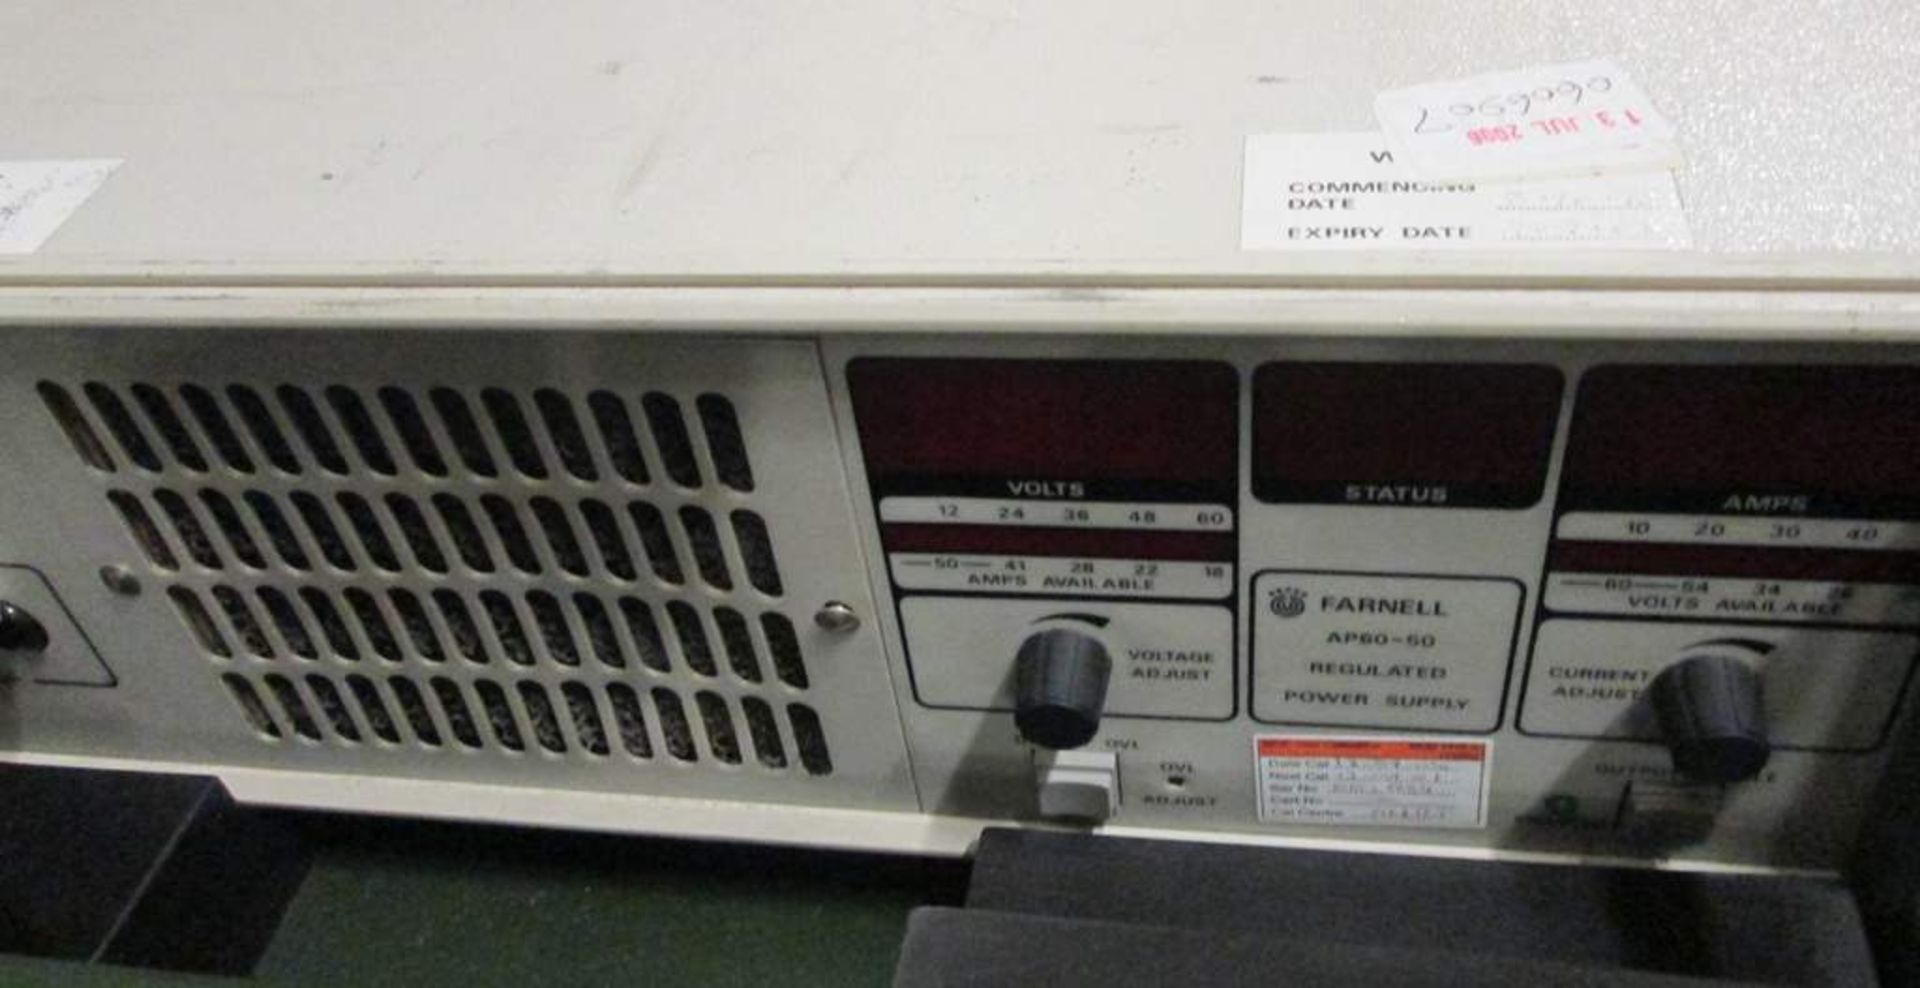 Farnell AP60-50 Power Supply - Image 2 of 2